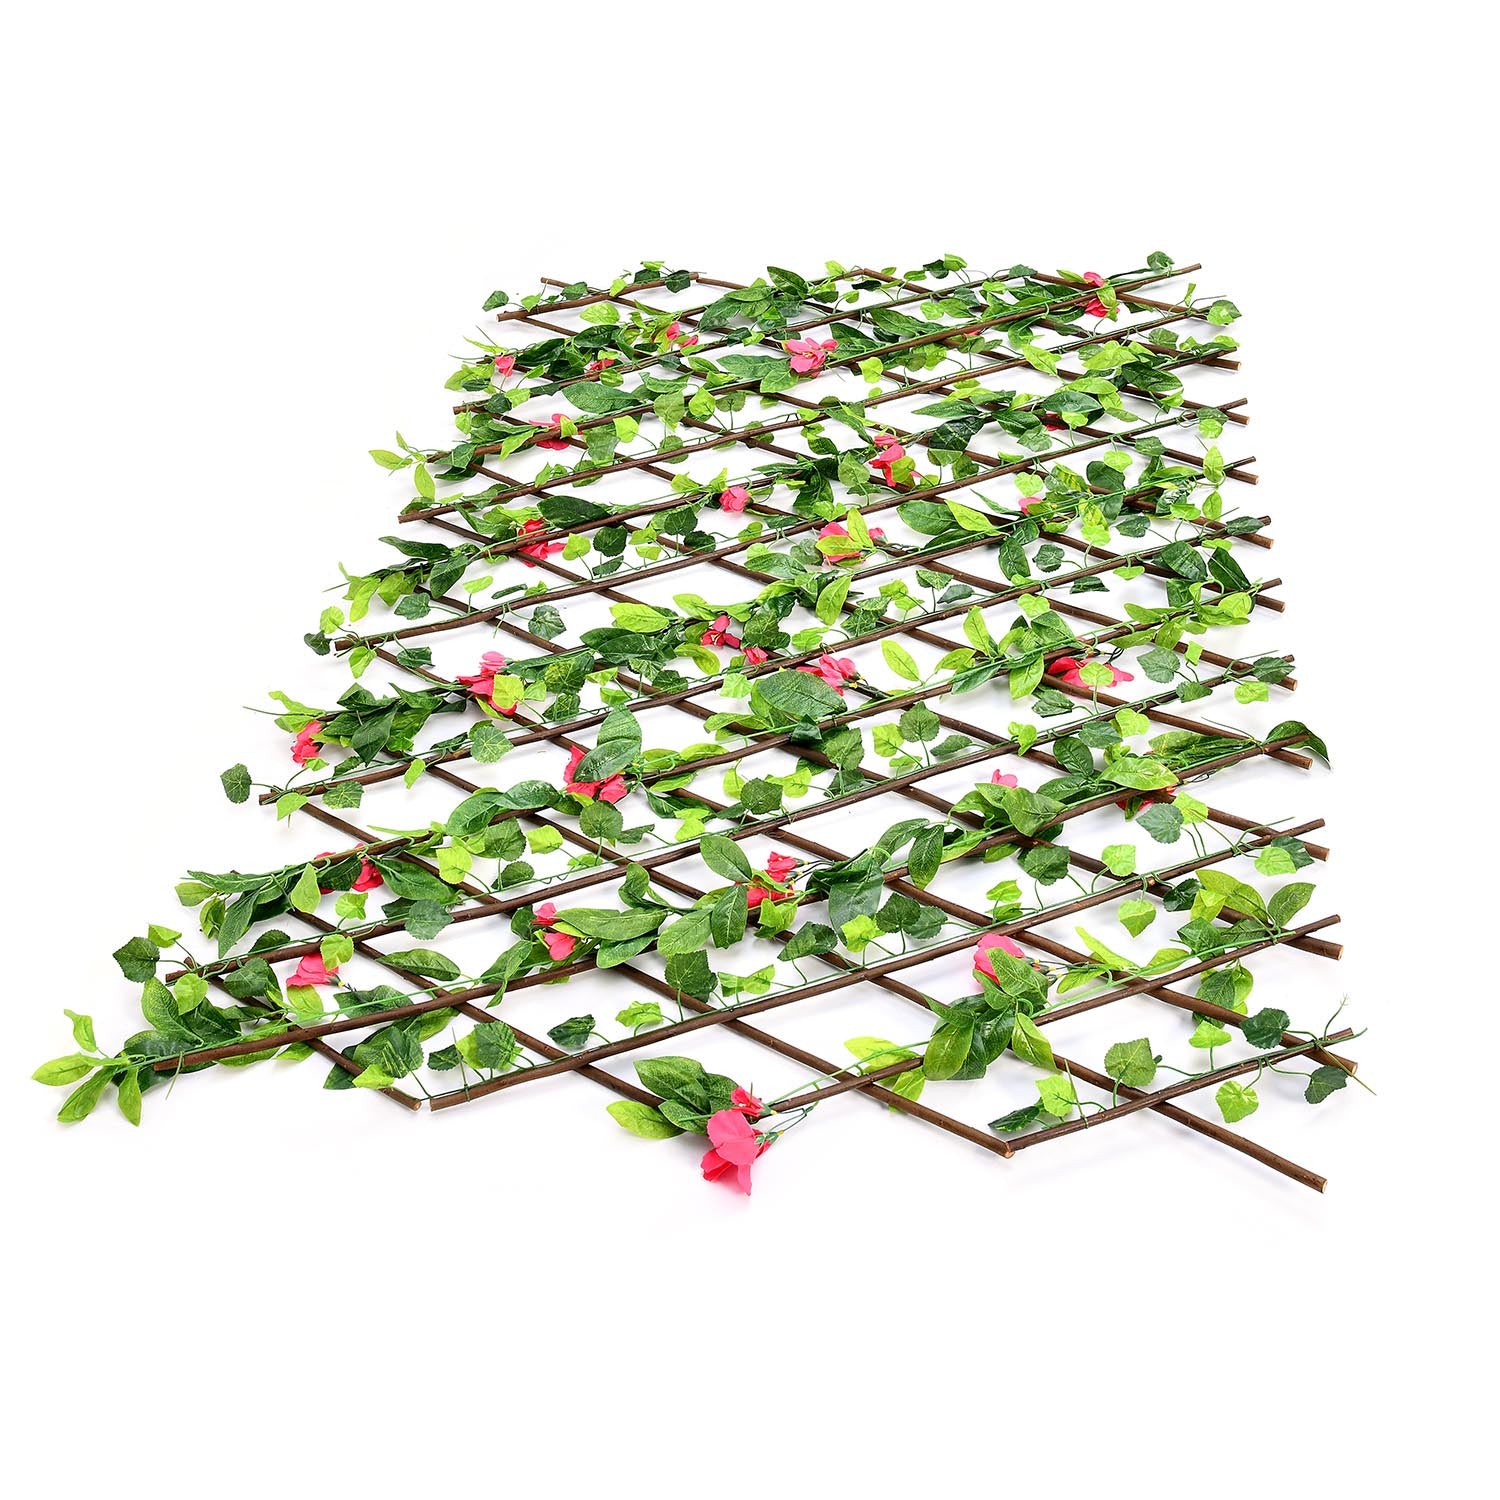 Expandable Fence With Flowers (Green & Red)